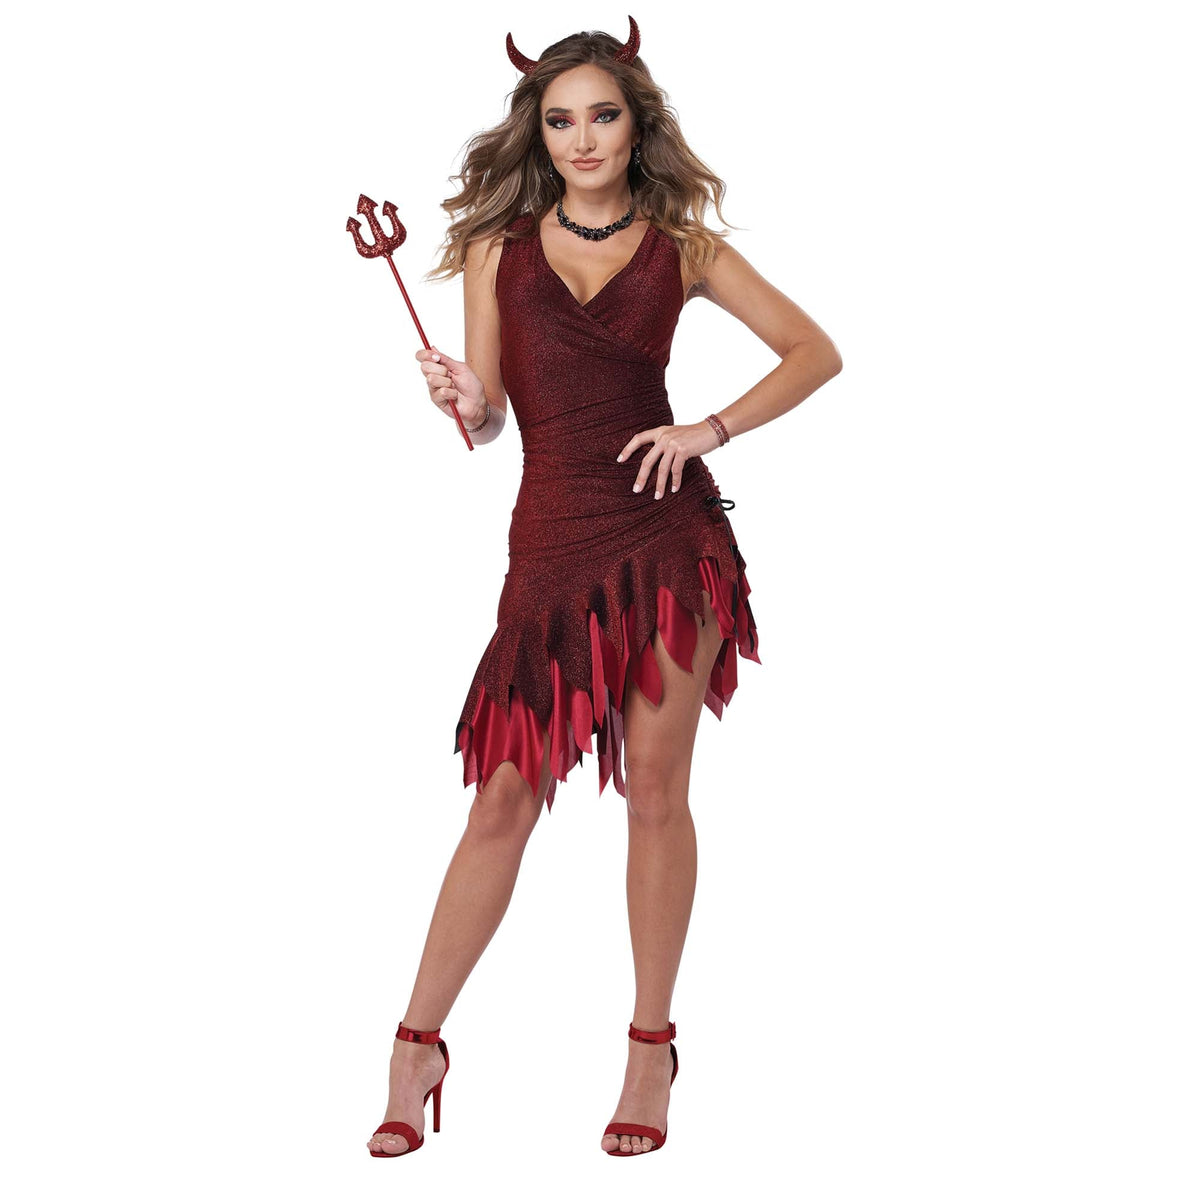 CALIFORNIA COSTUMES Costumes Red-Hot Sizzling Devil Costume for Adults, Red Dress